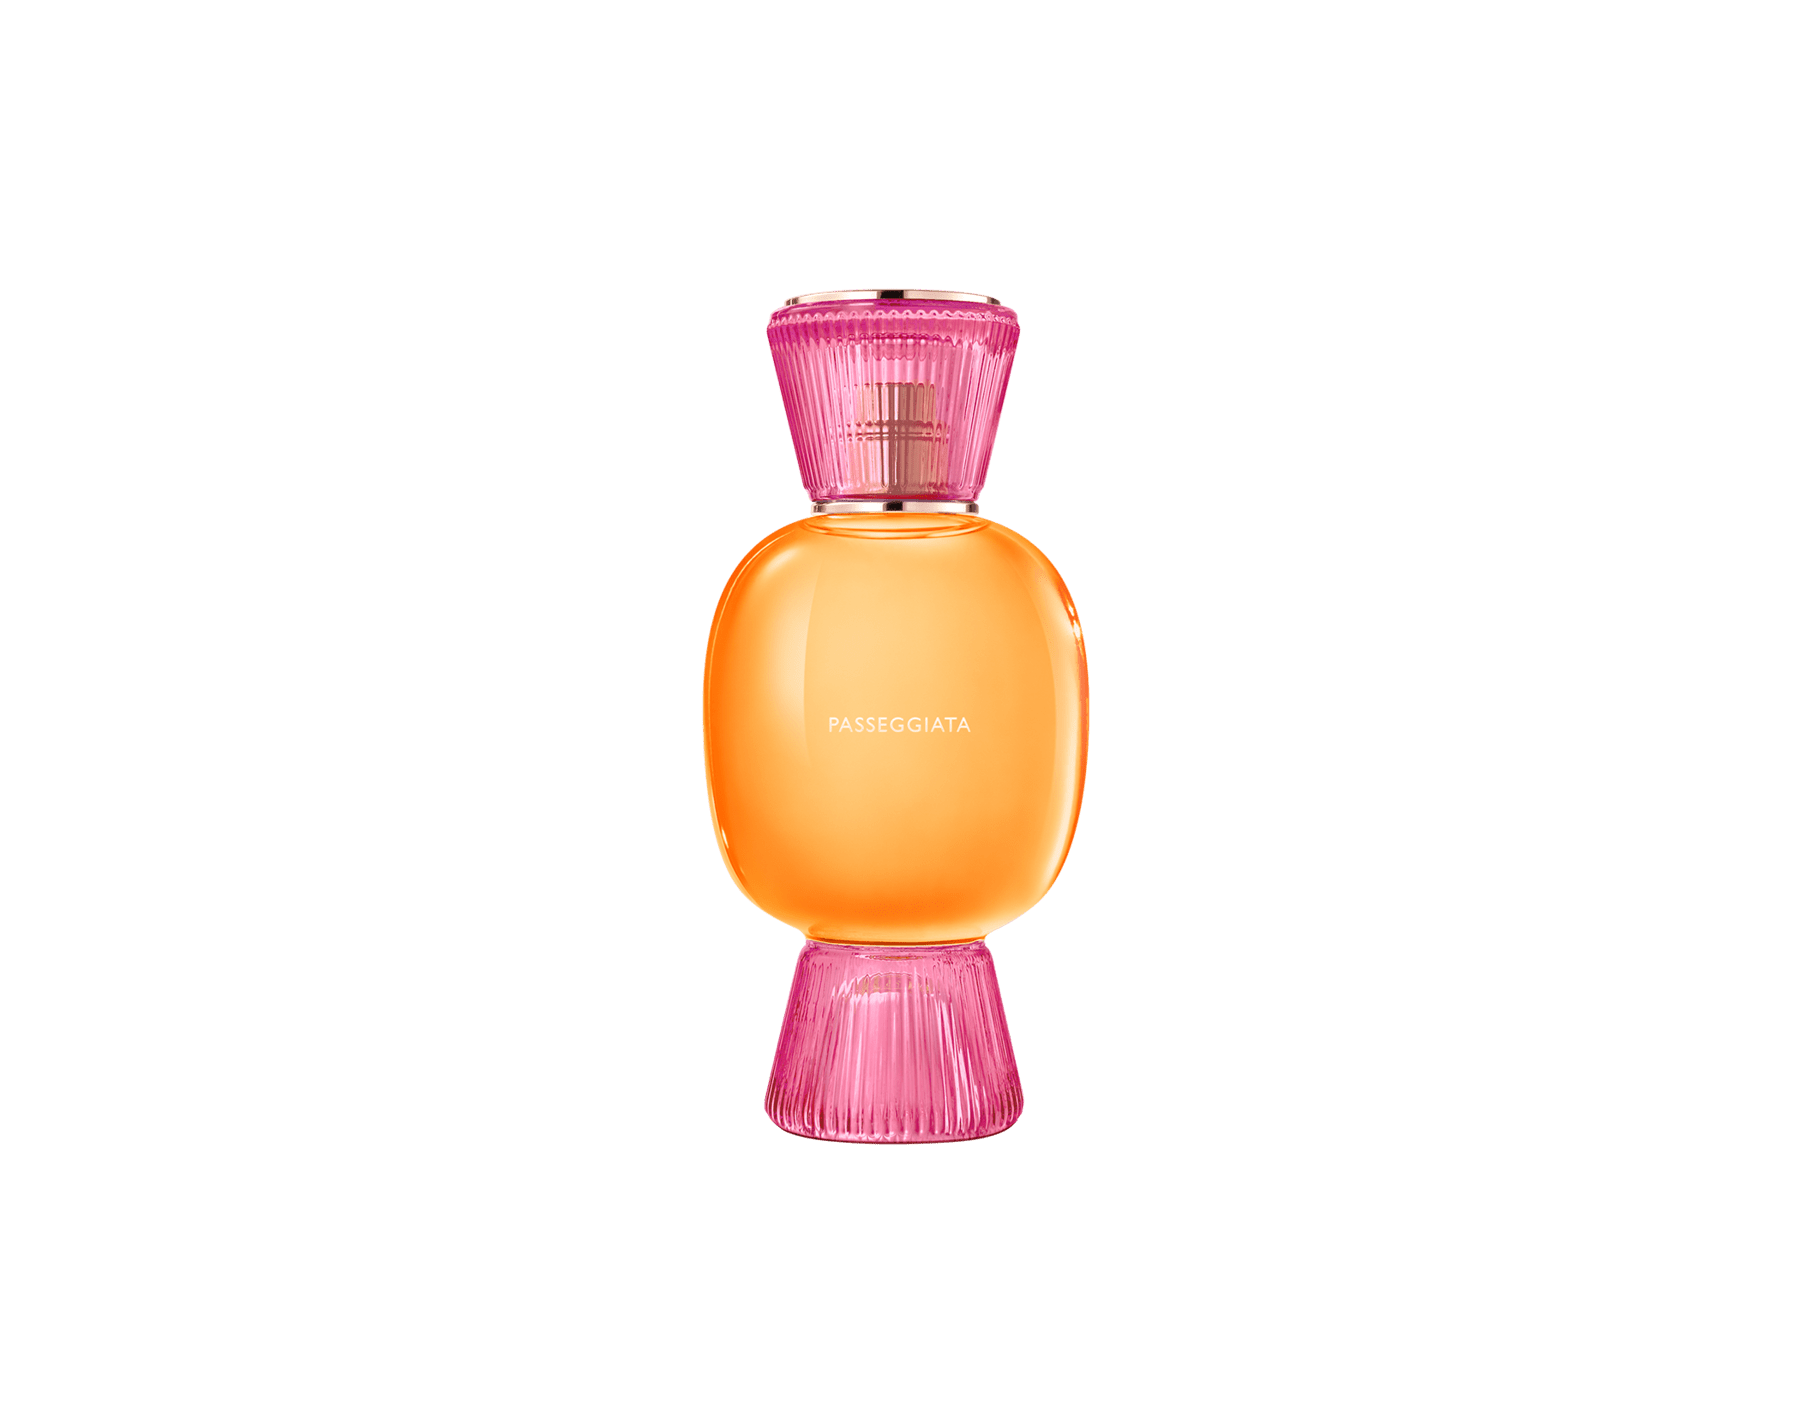 BVLGARI ALLEGRA Passeggiata Eau de Parfum is a beaming floral musk embodying the cheerful feeling of spending a moment together after a traditional stroll in Italy. 41968 image 1